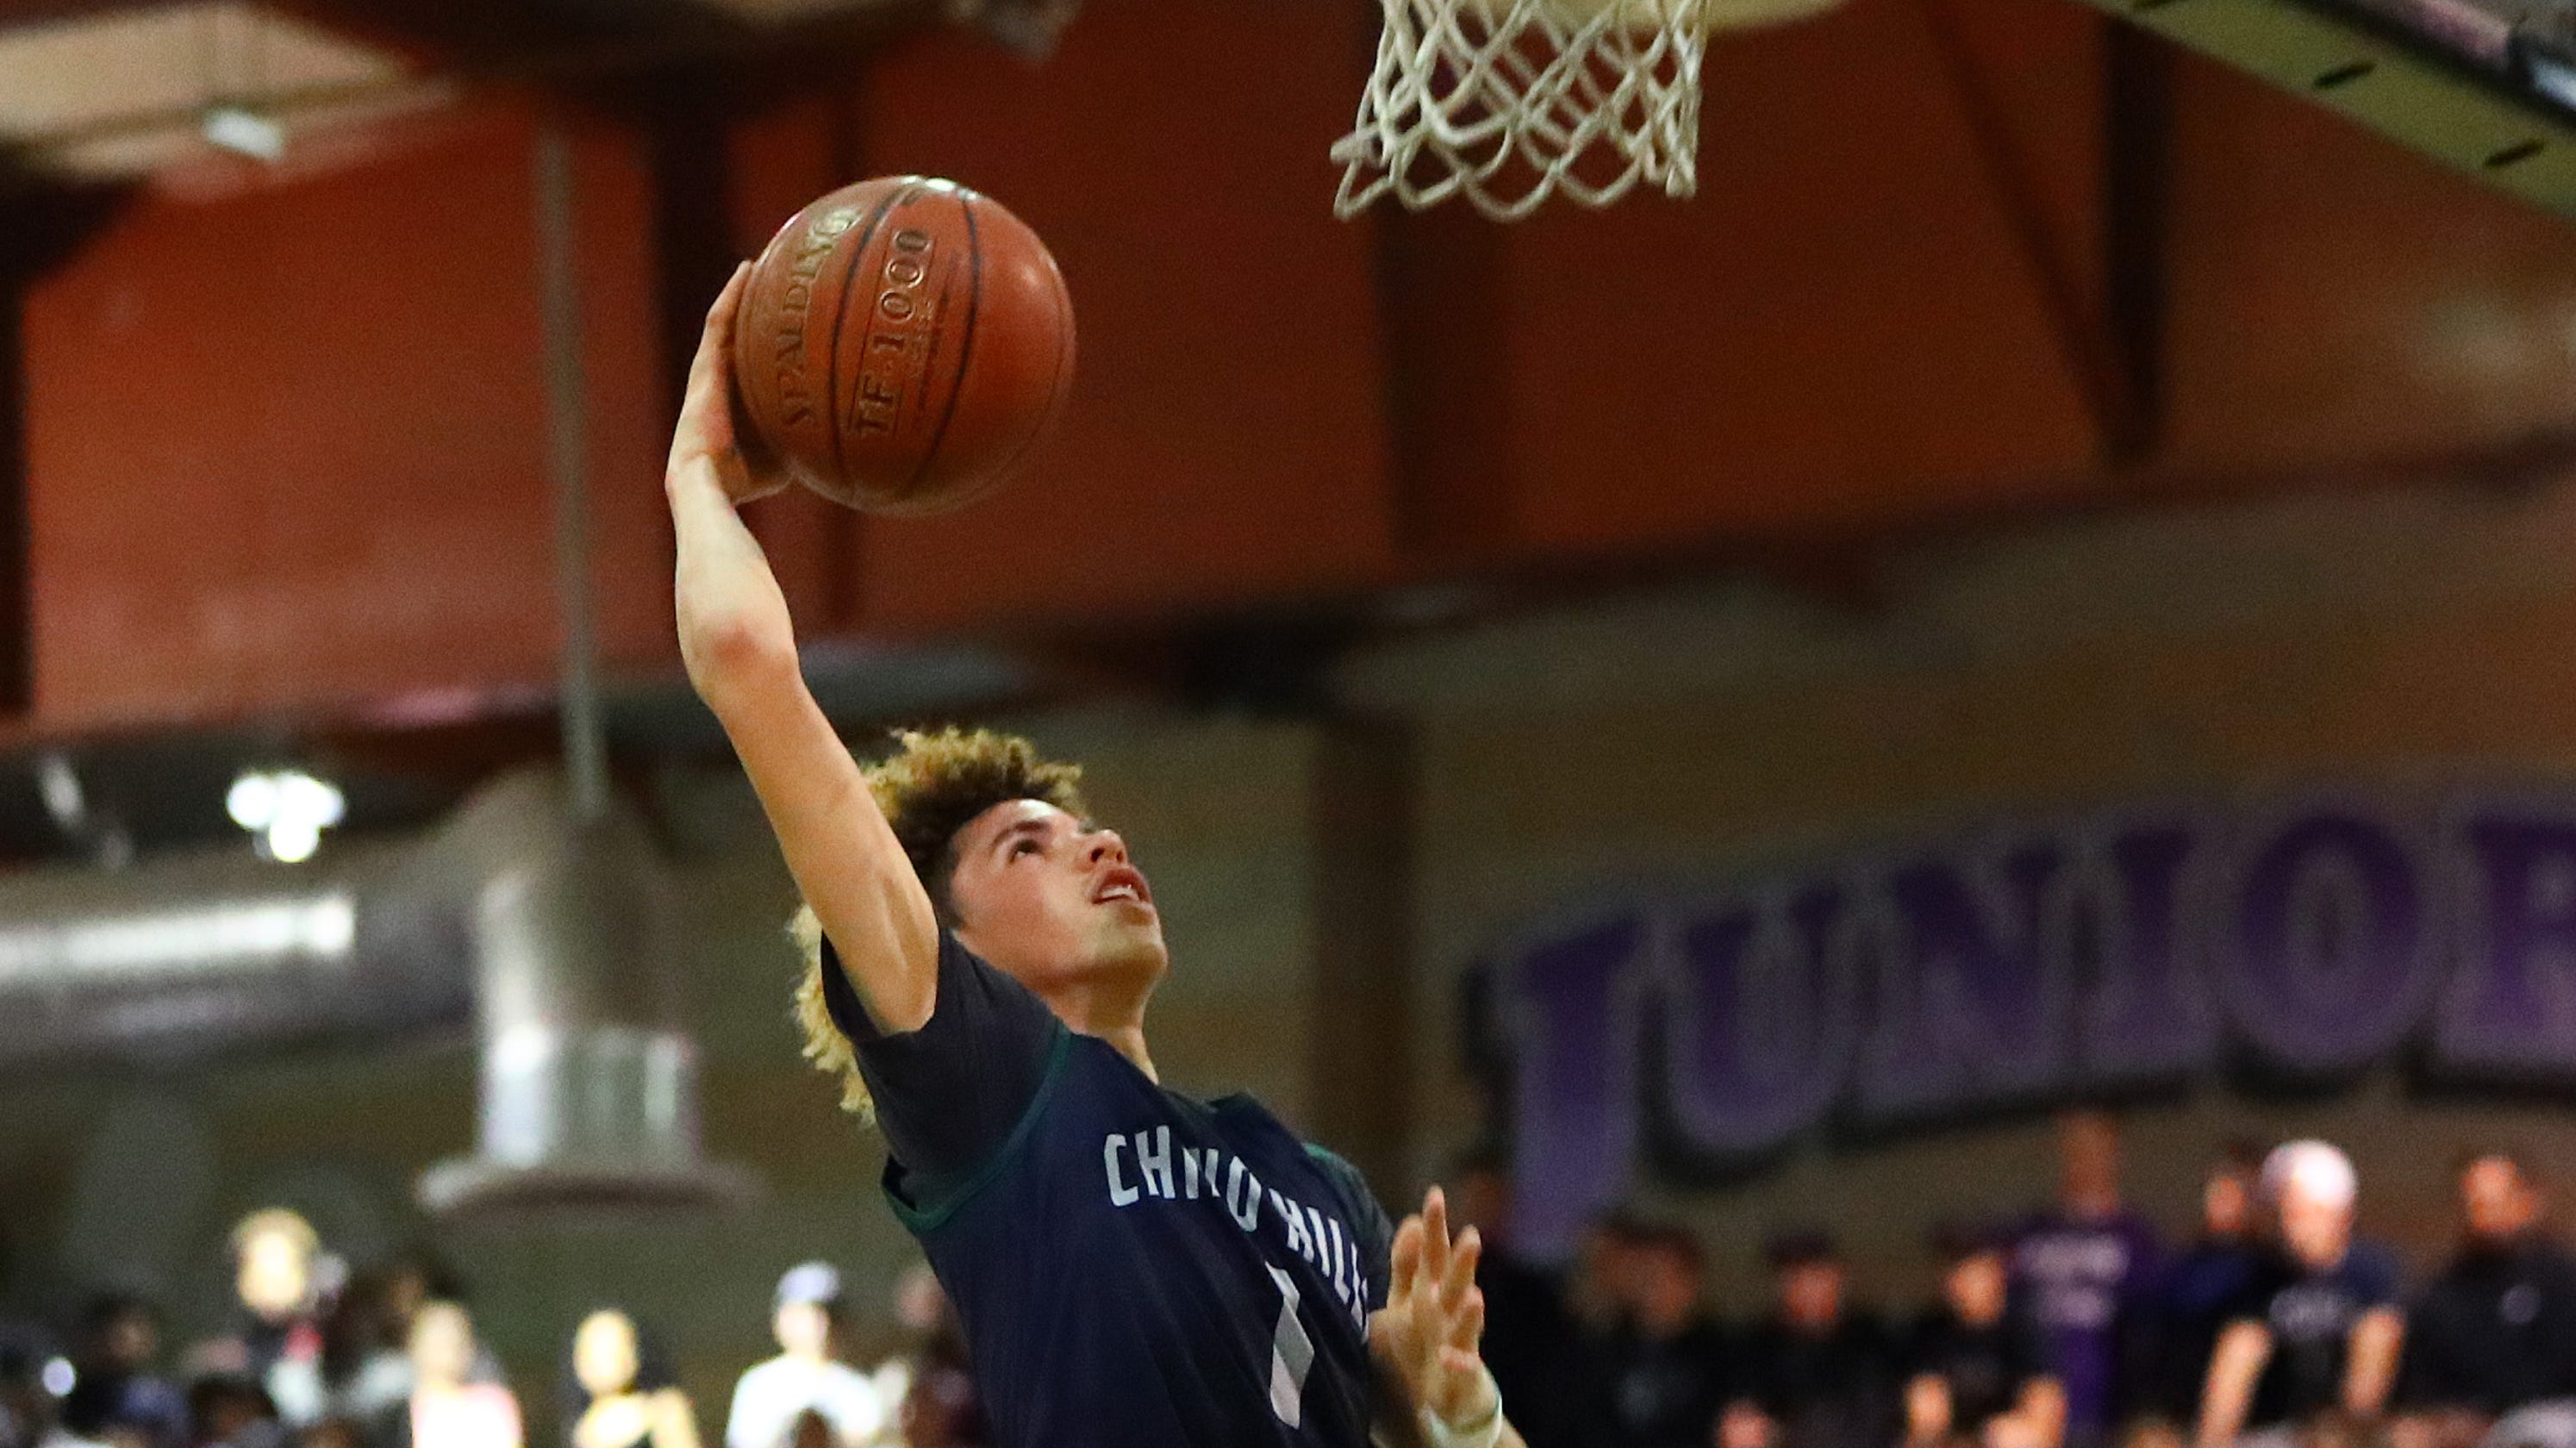 LaMelo Ball will not play at Governor's Challenge